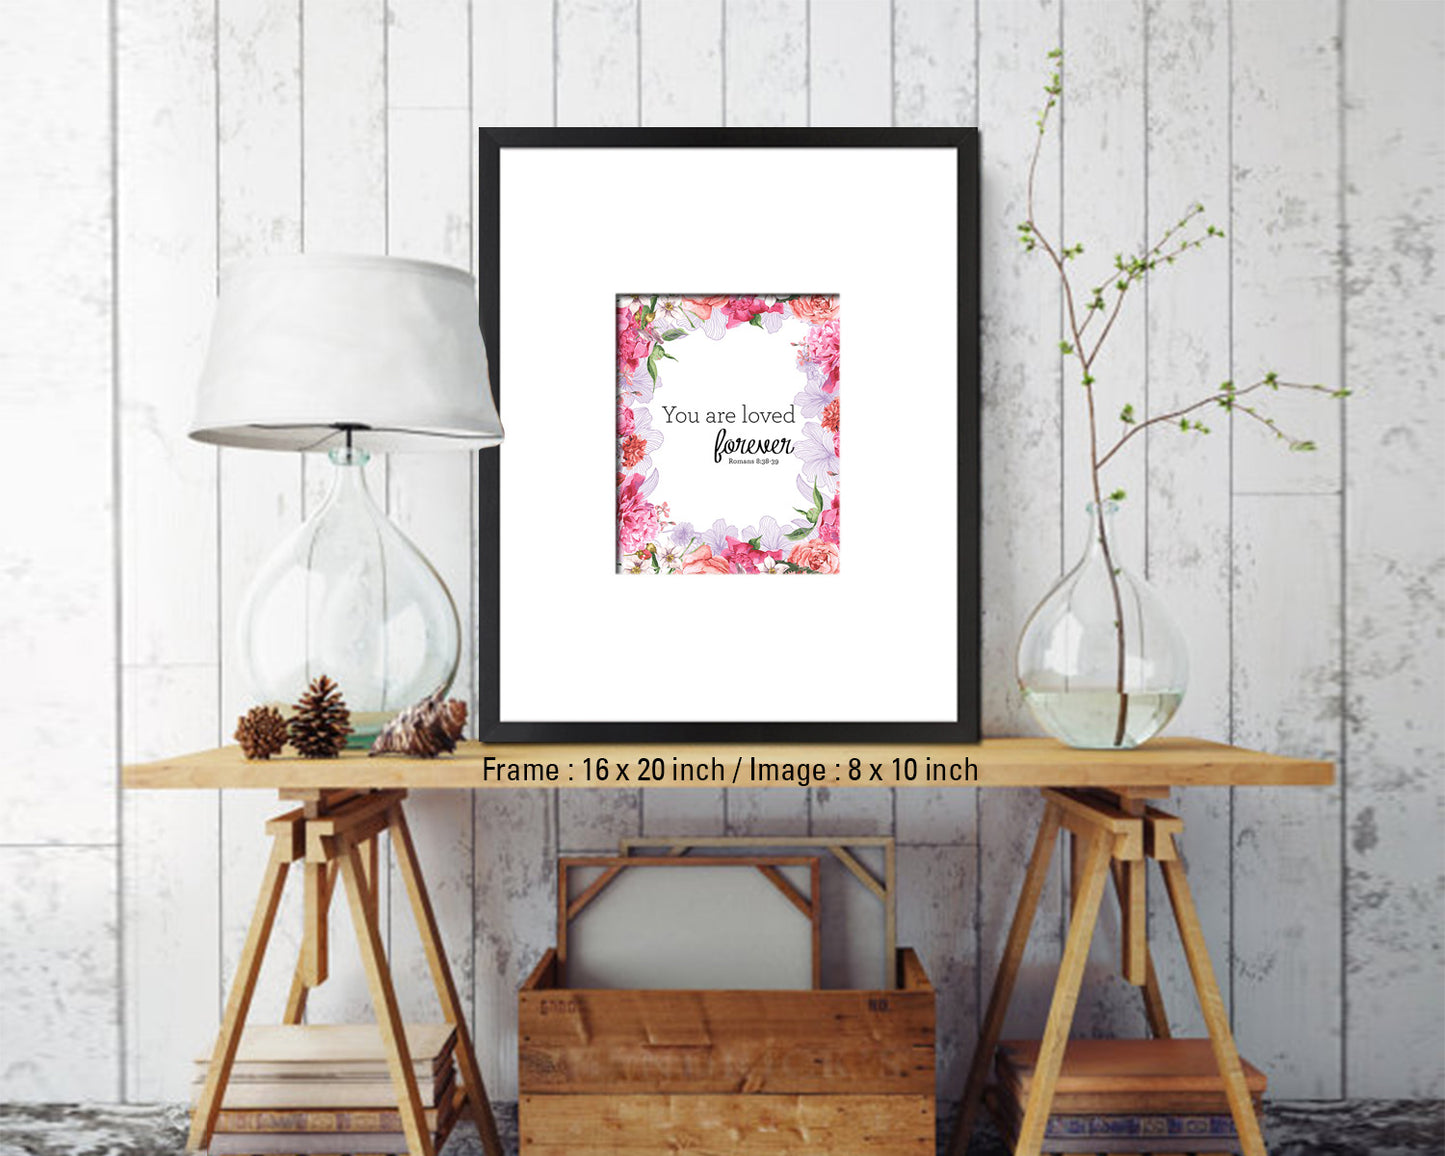 You are loved forever Quote Framed Print Home Decor Wall Art Gifts